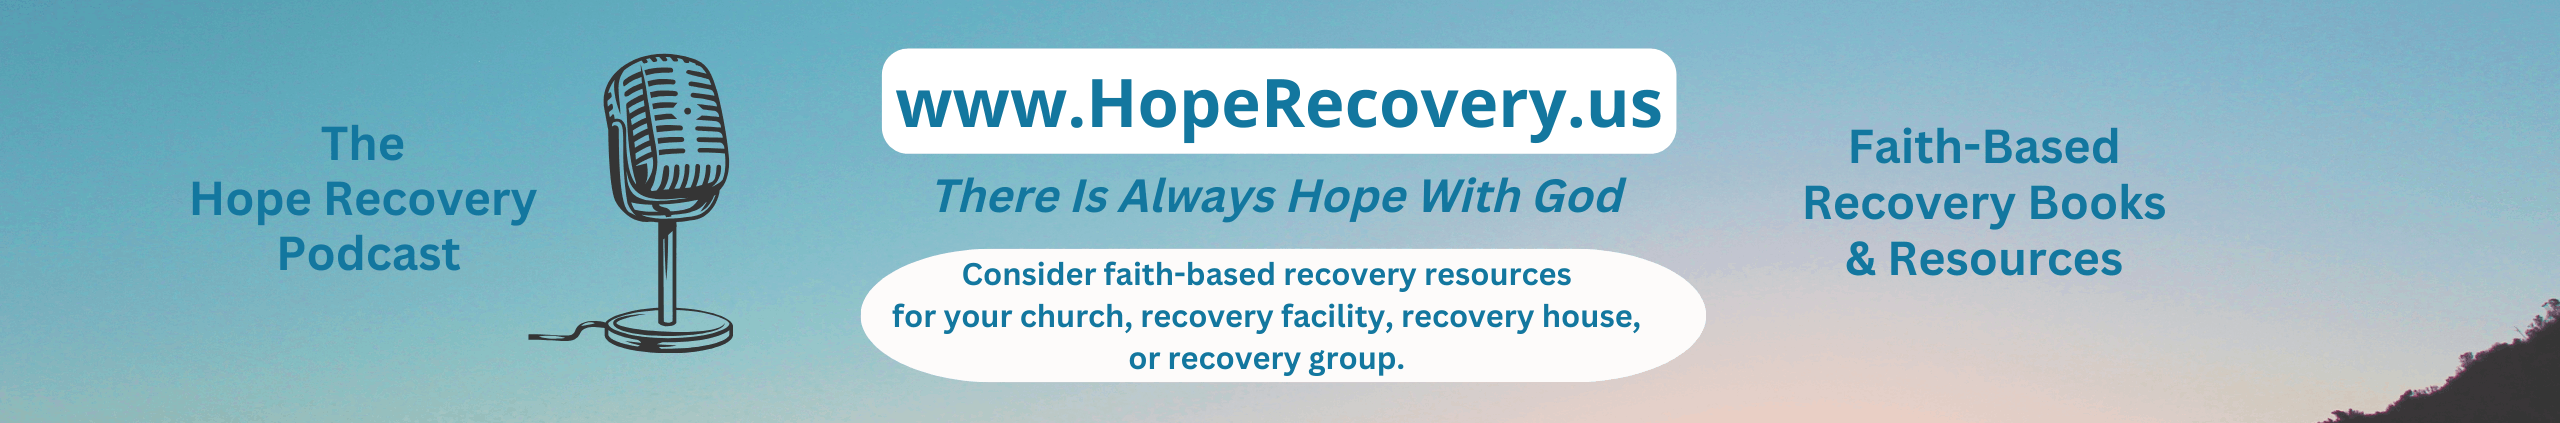 The Hope Recovery Podcast - Faith-based